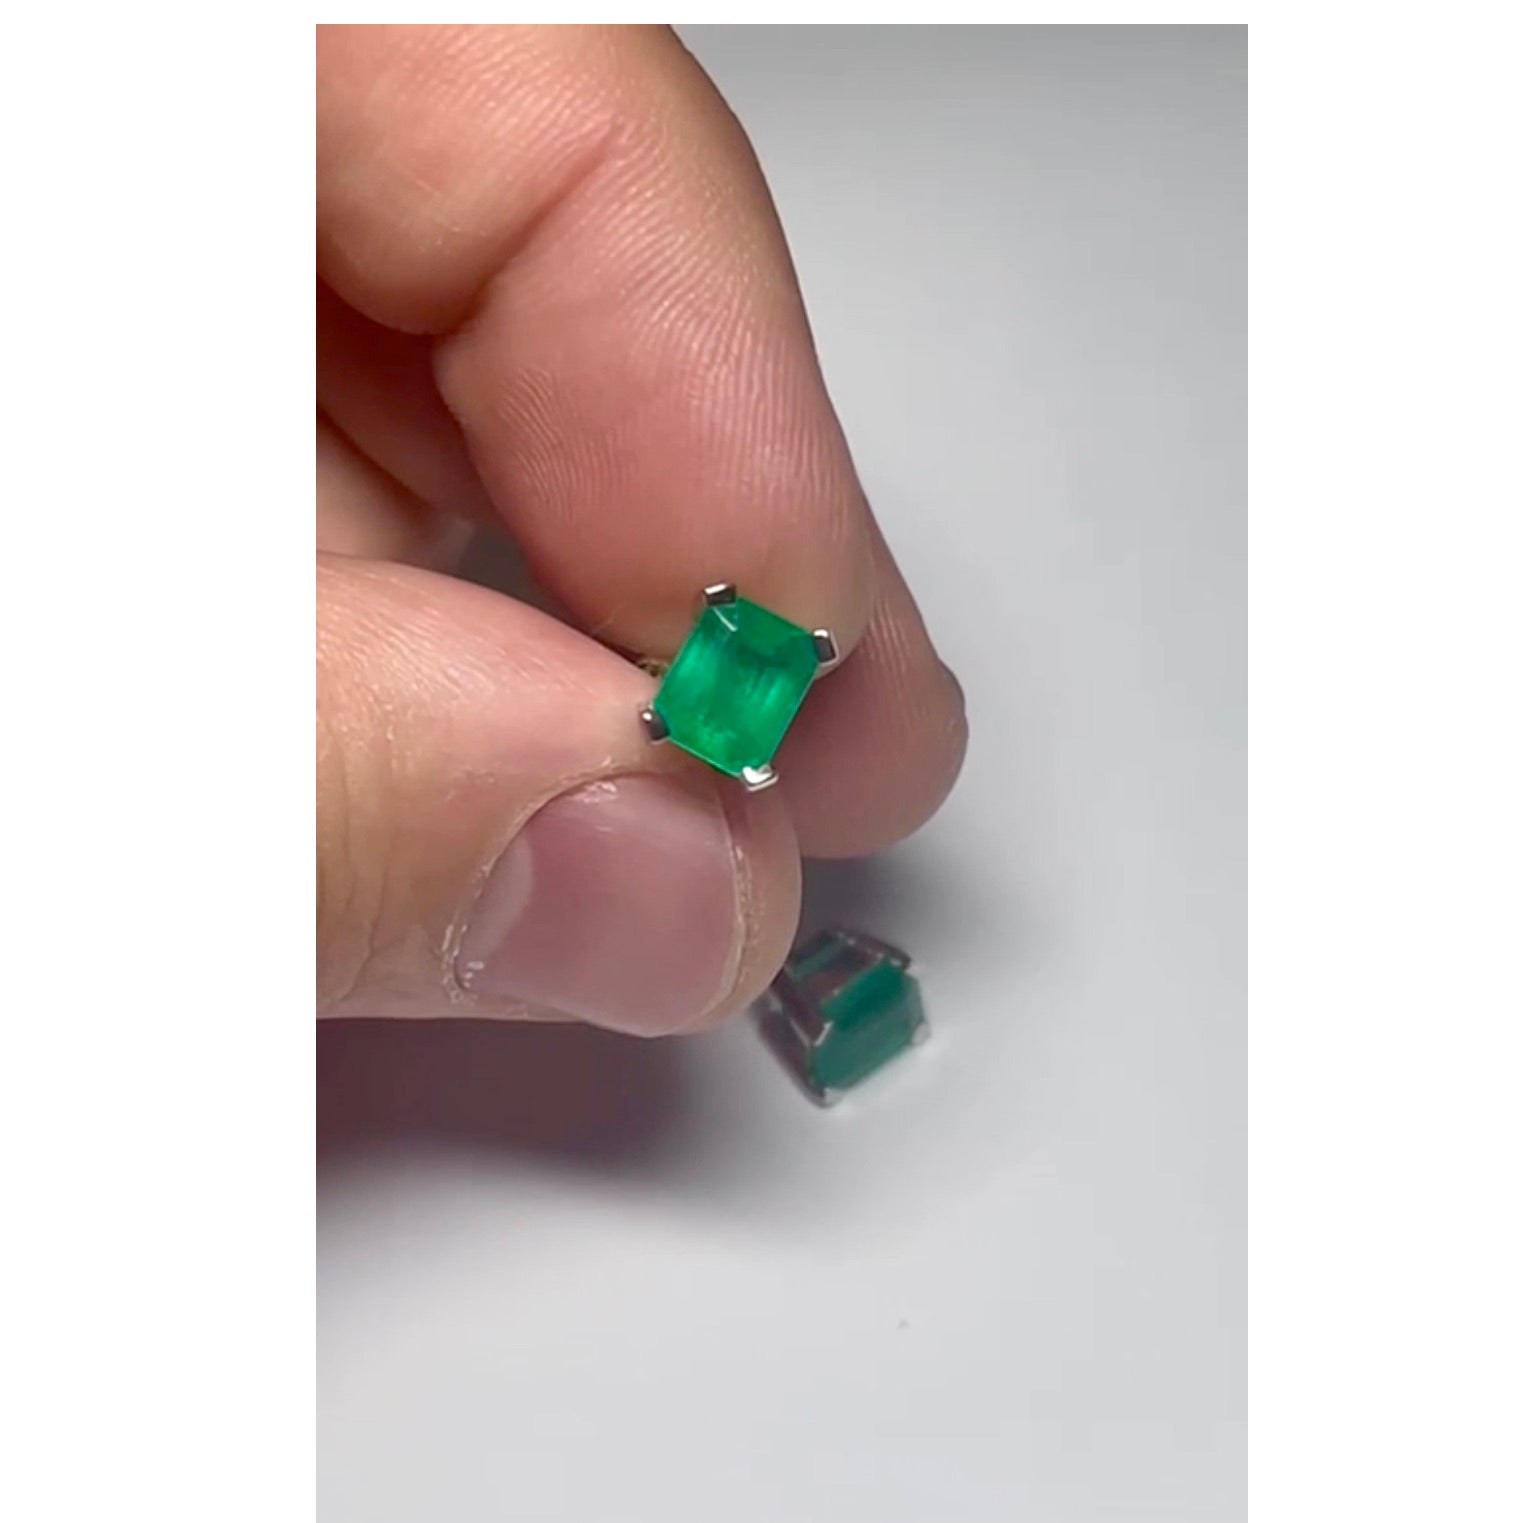 2.09 Carat Natural AAA Colombian Emerald Stud Earrings 18K White Gold